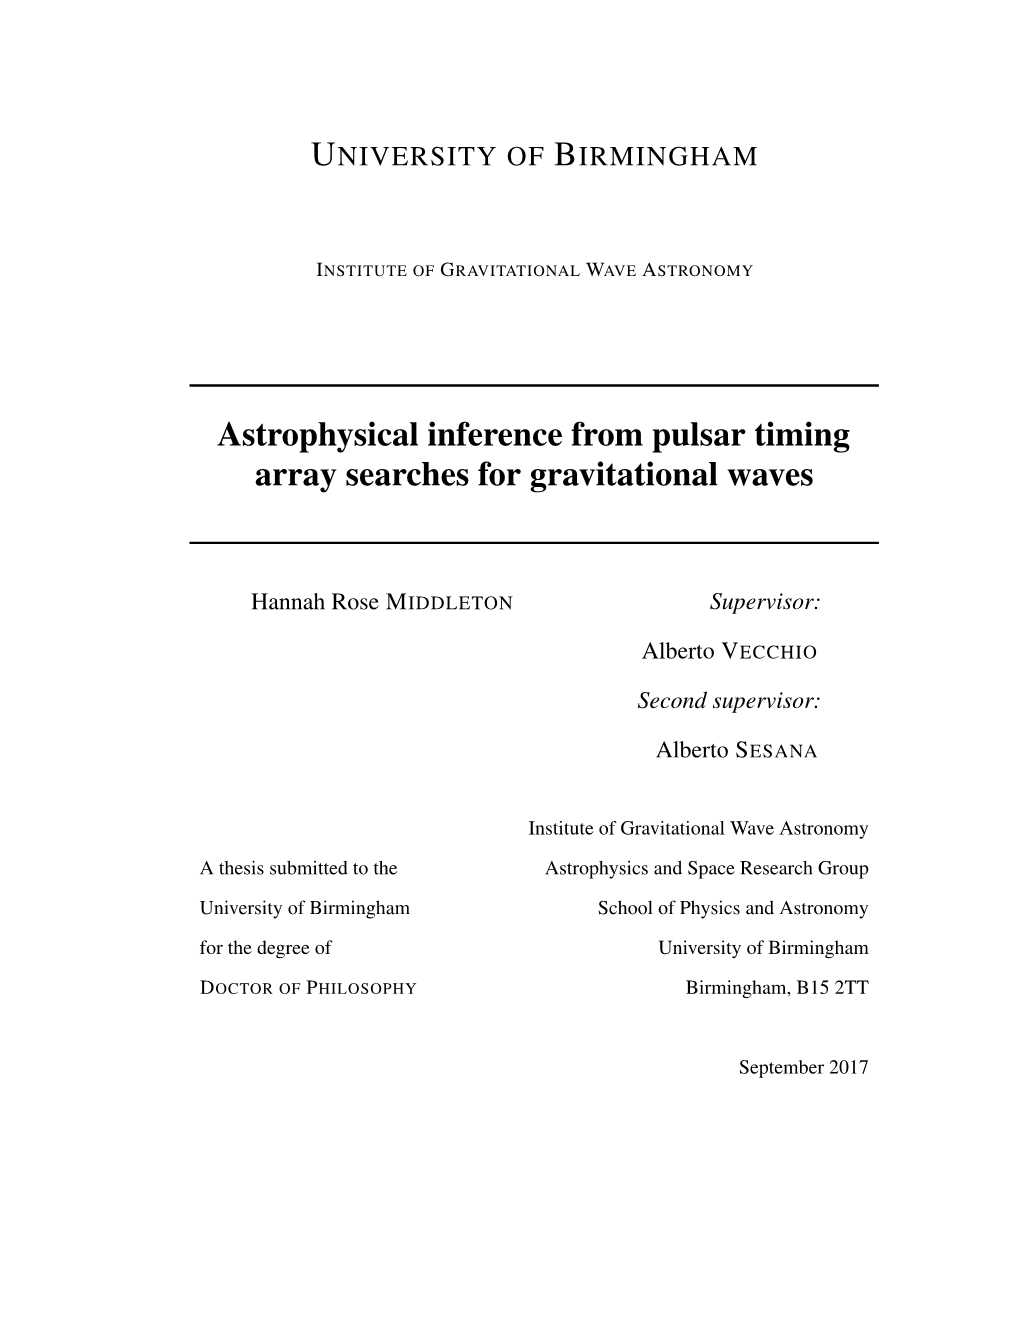 Astrophysical Inference from Pulsar Timing Array Searches for Gravitational Waves